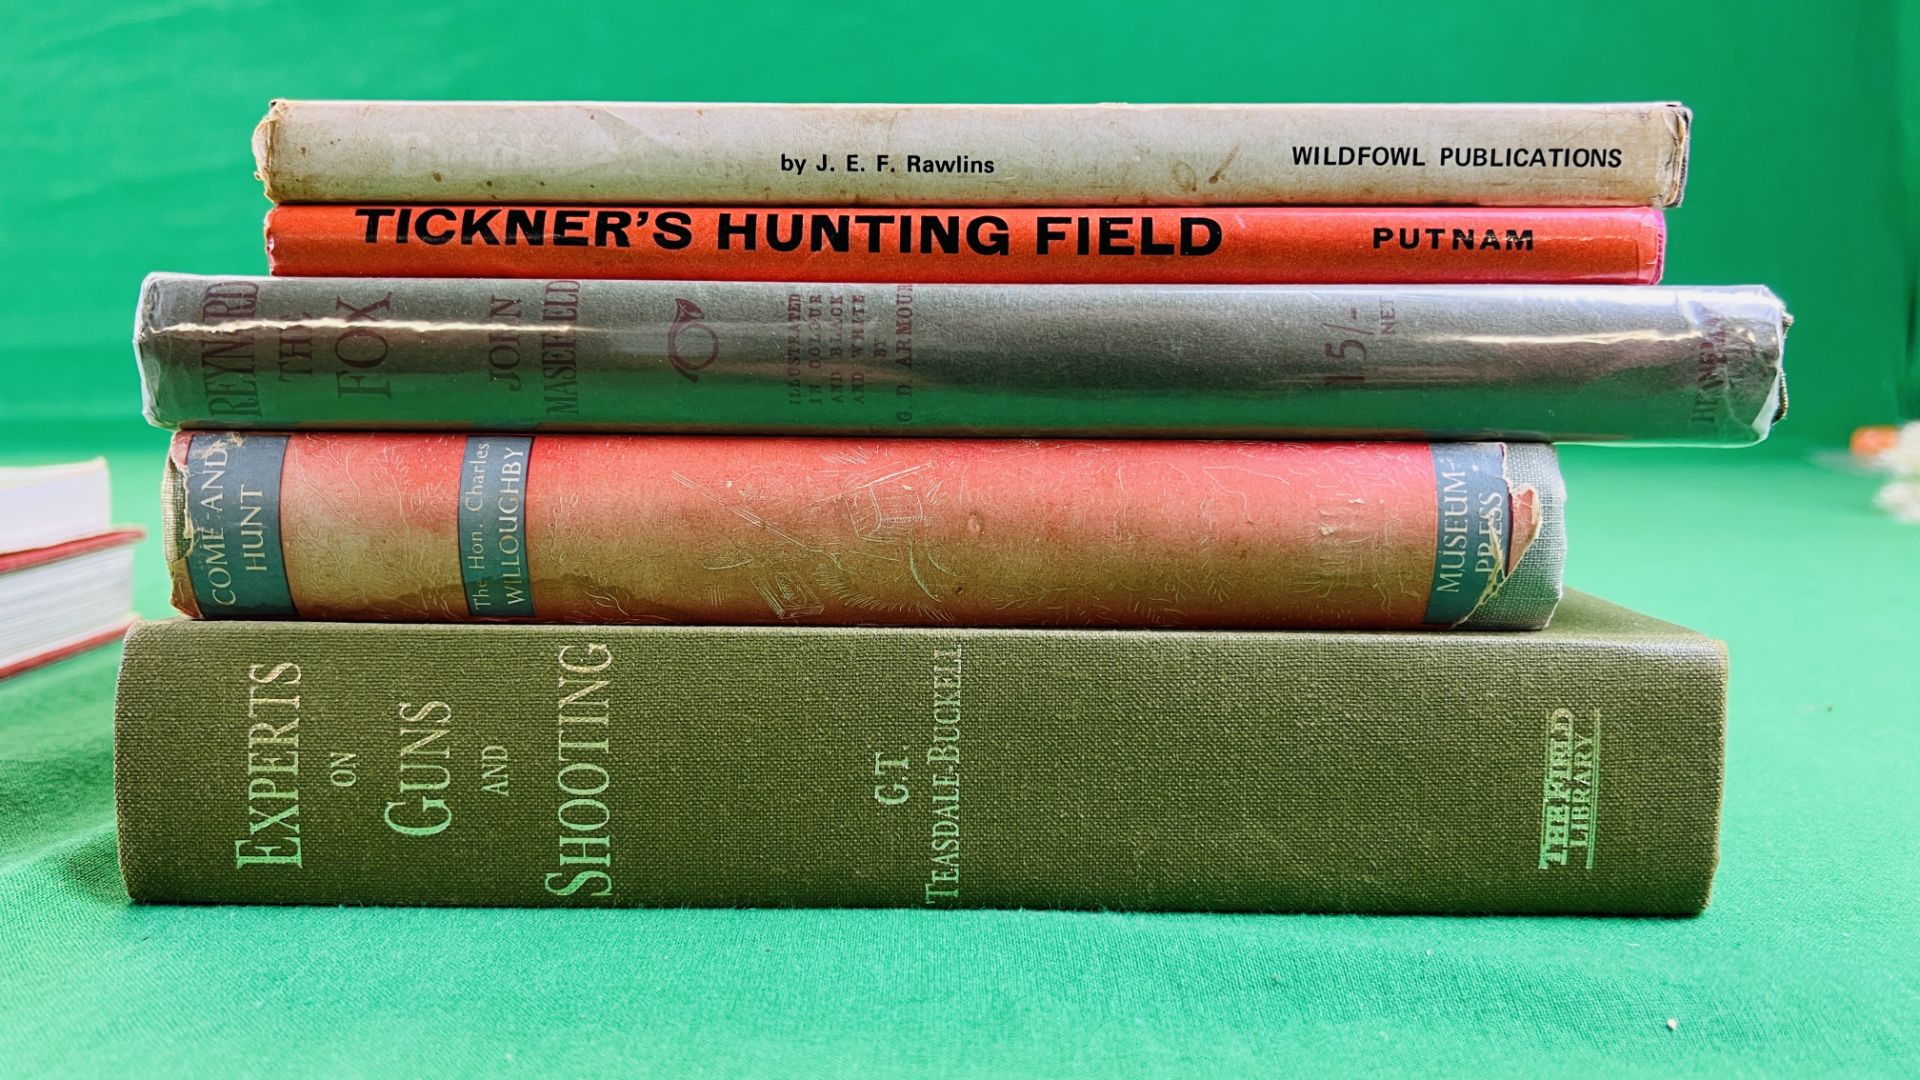 FIVE BOOKS RELATING TO HUNTING AND SHOOTING TO INCLUDE REYNARD THE FOX - JOHN MASEFIELD,